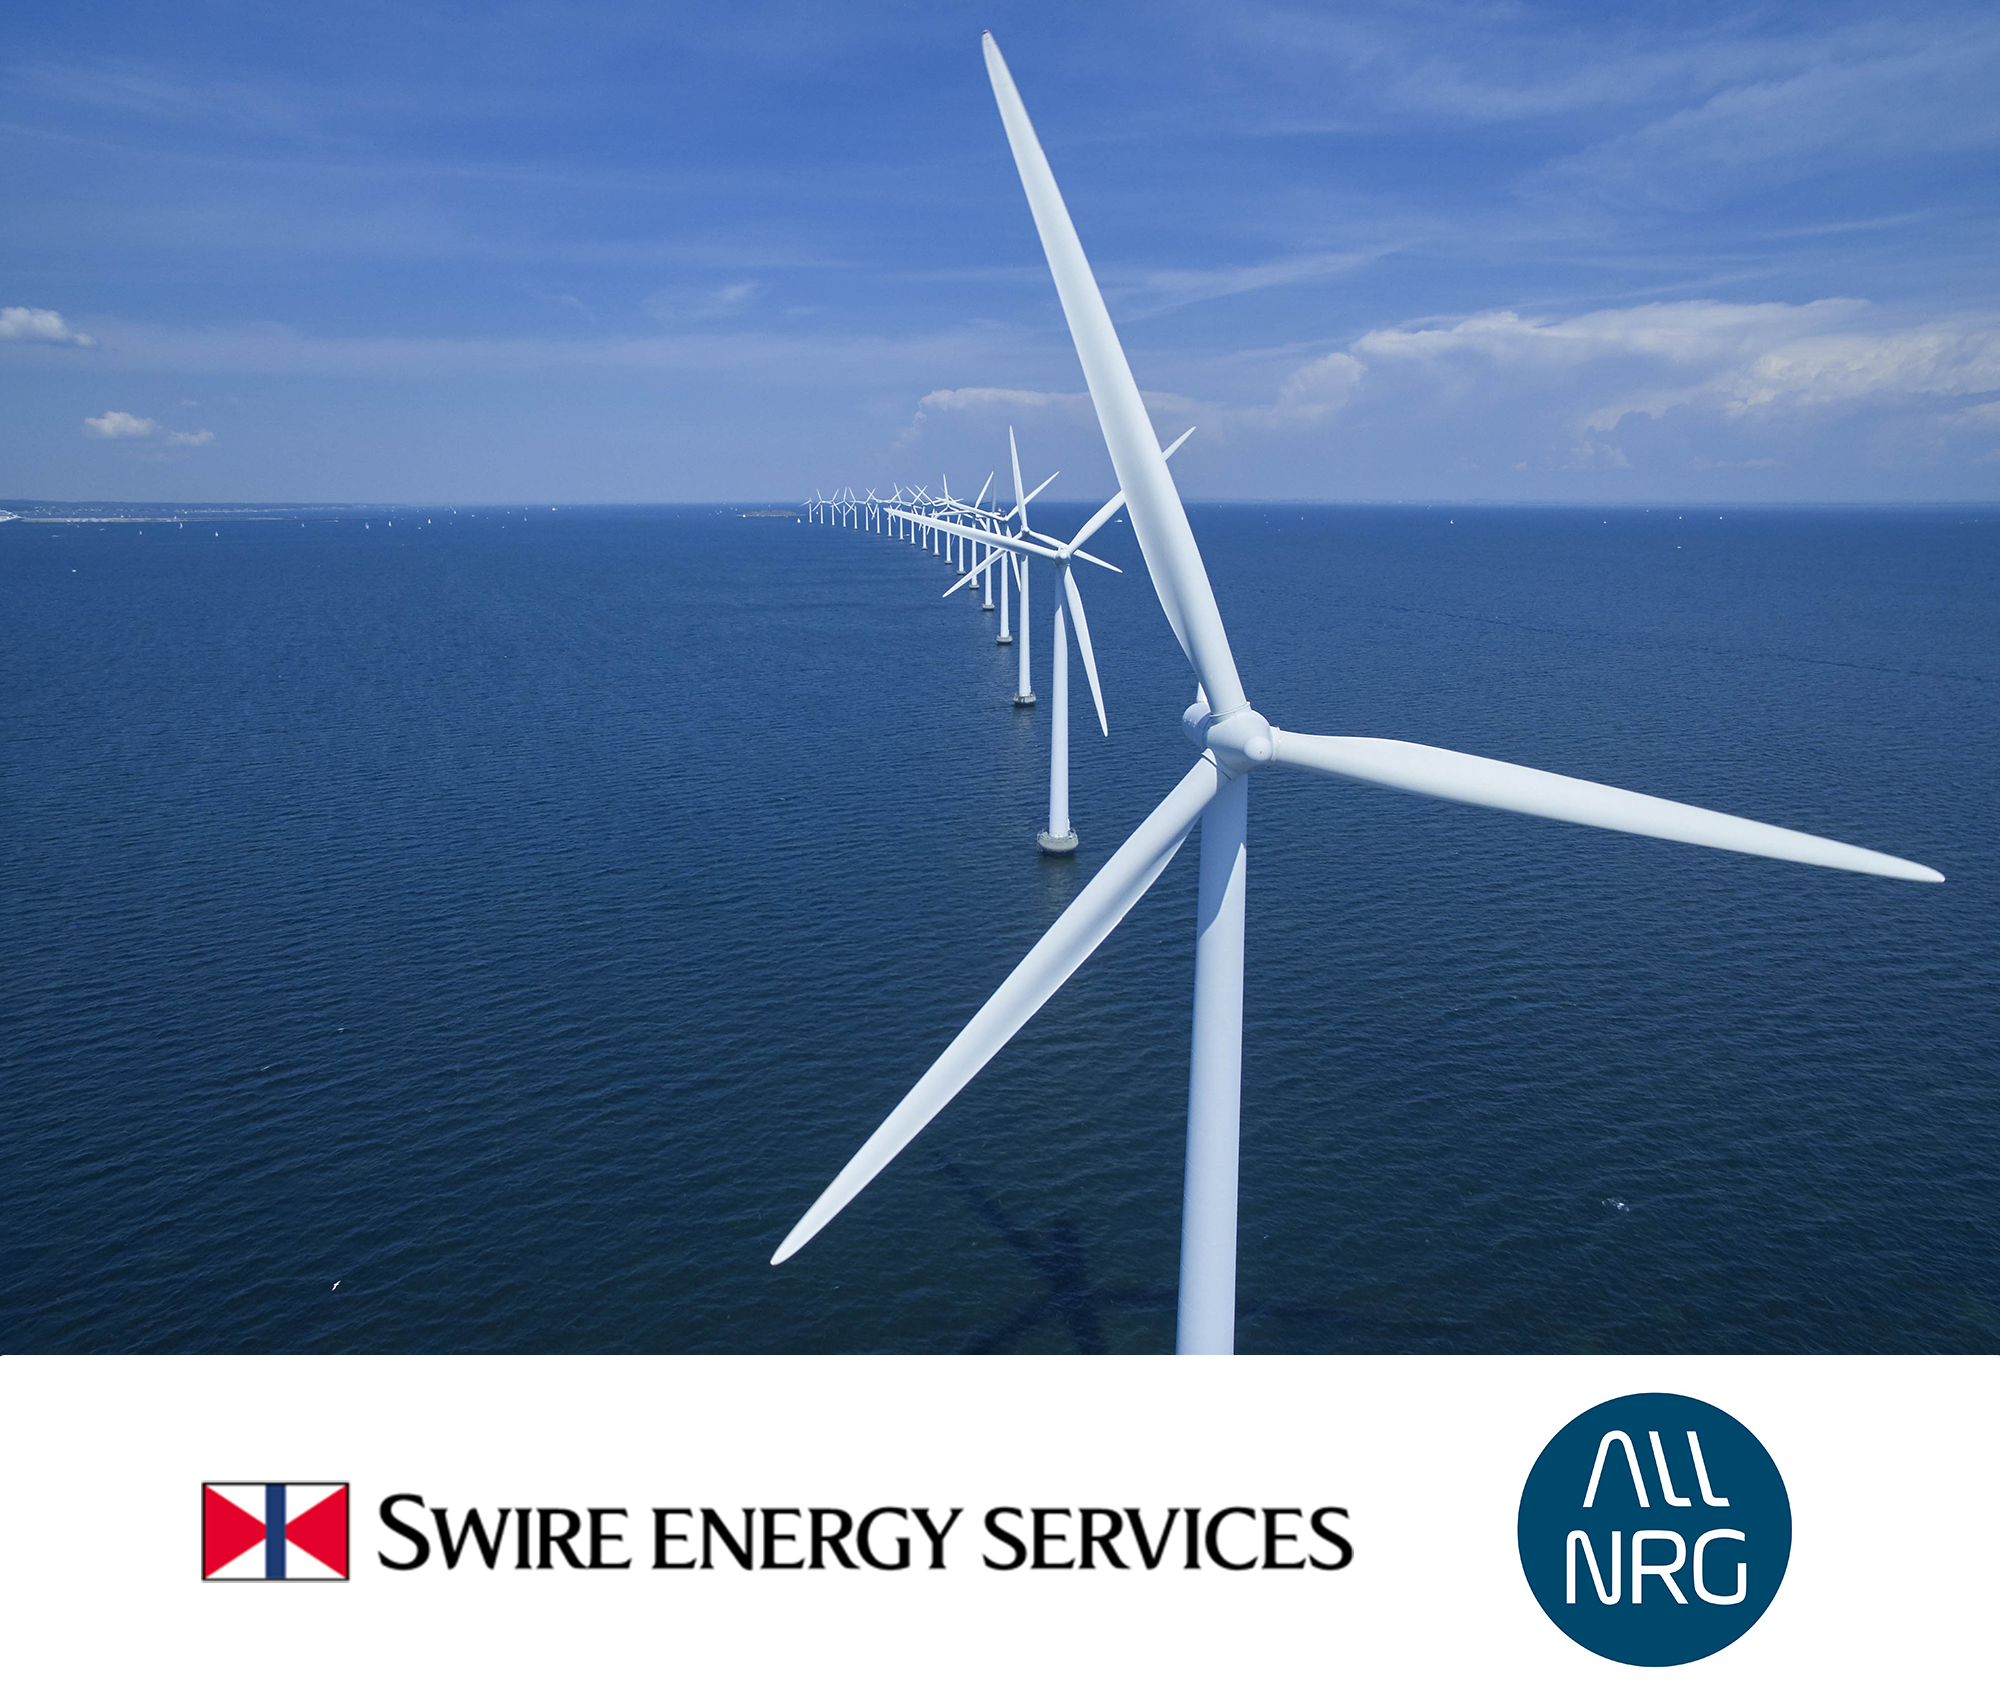 Advisor to Swire Energy Services on the acquisition of ALL NRG